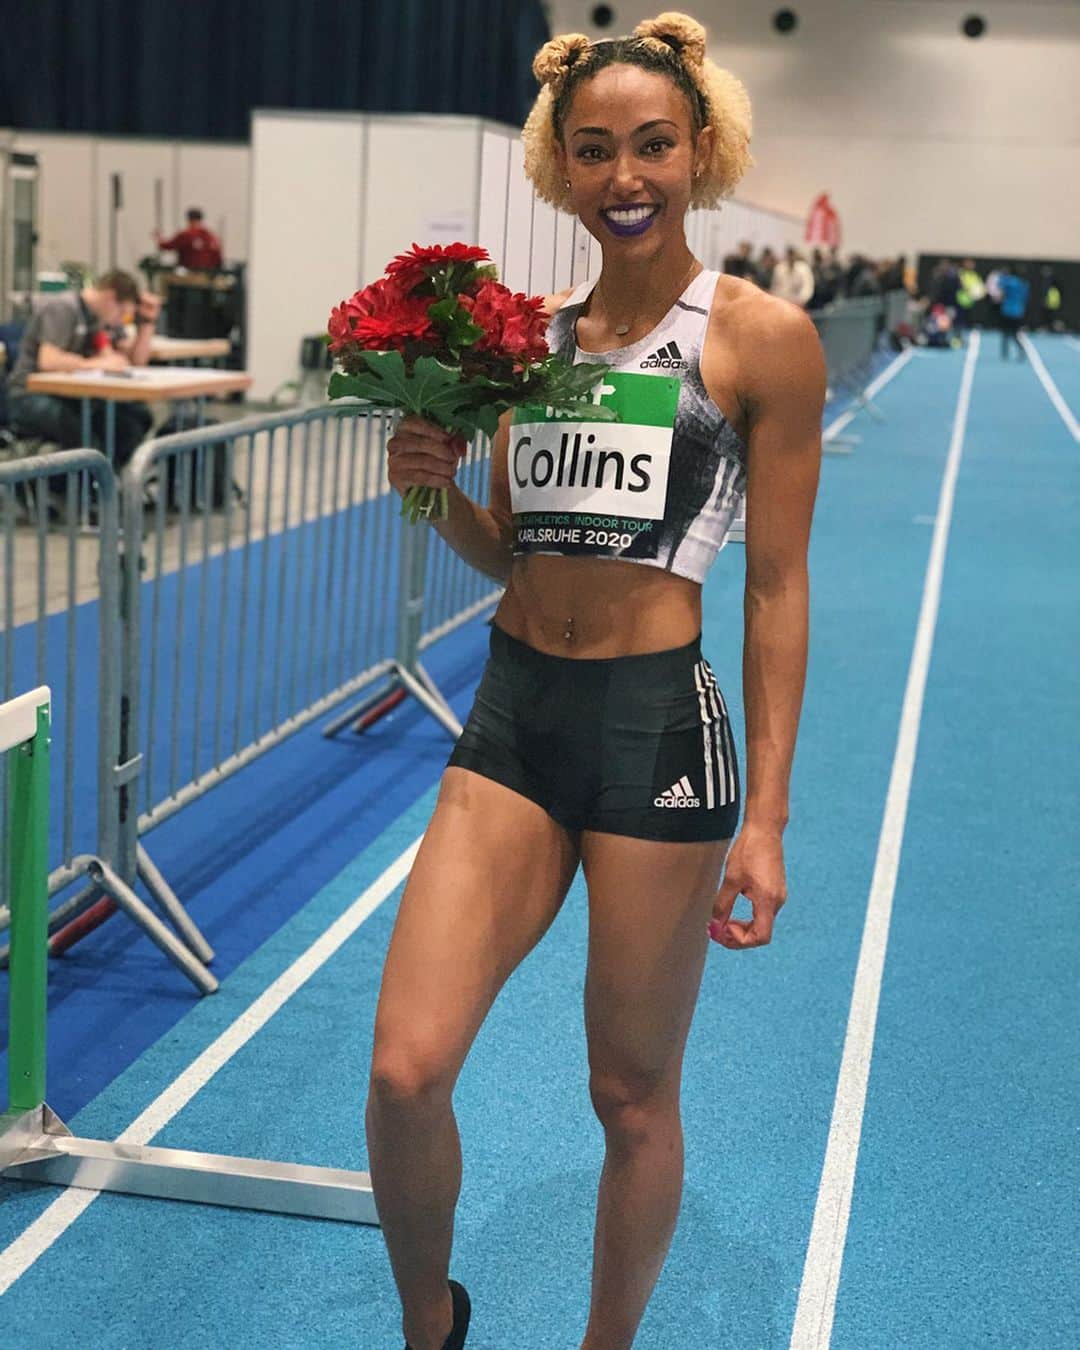 Shania COLLINSのインスタグラム：「#MambaMentality 💜🙏🏽 inspired lipstick for my race today ~ ~ And it was a victory & season best! These are my first race flowers too 🤗💐 Thank you for having me @indoormeetingkarlsruhe. Next up: Paris」